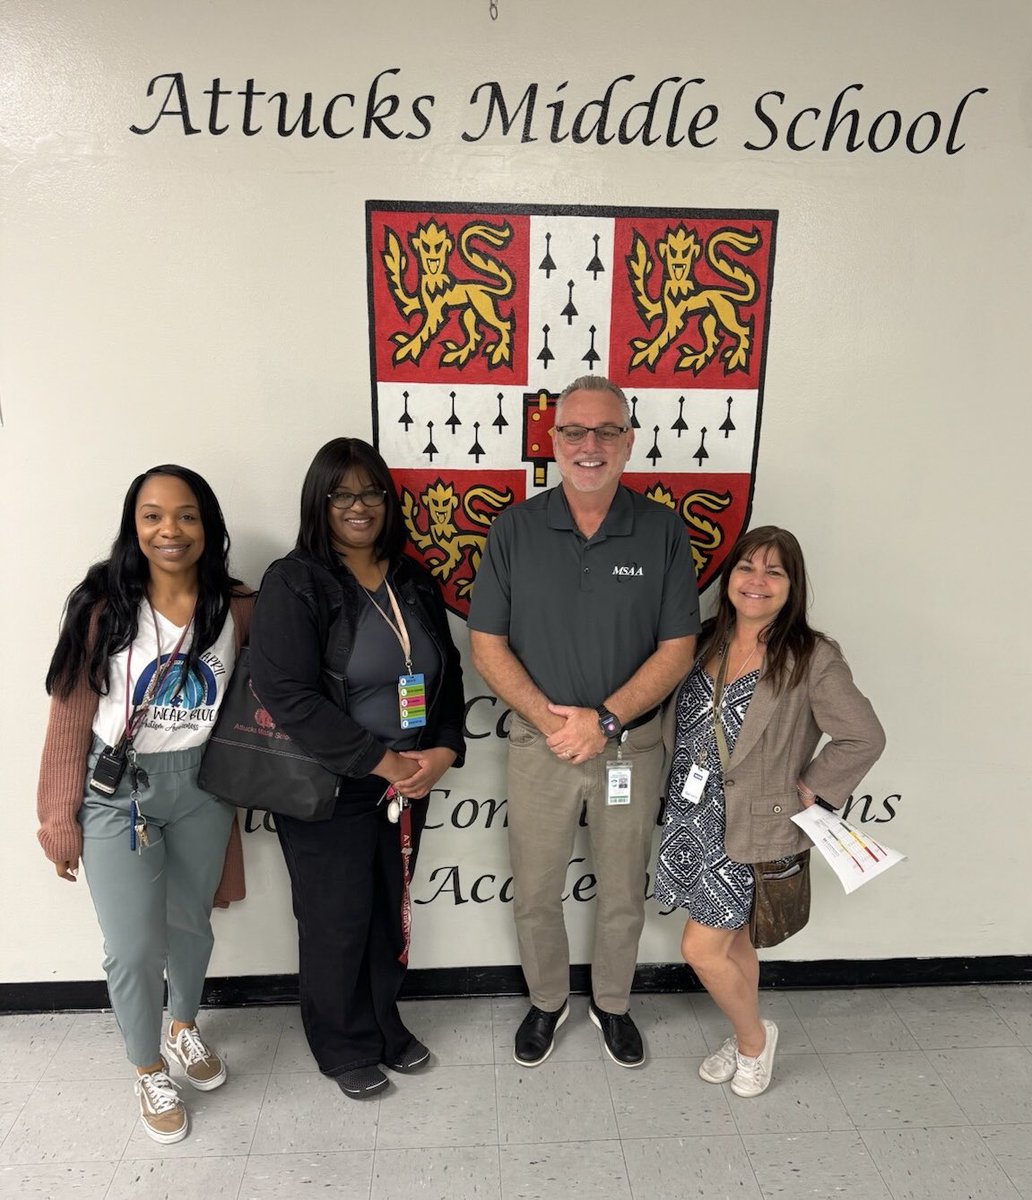 An AMAZING visit w/our visionary and beloved Supt. Dr. Licata. Great discussion - transforming our atriums infusing rich history of ⁦@AttucksMS⁩ into interactive areas for Ss. Attucks Historical Museum 🦅 ⁦@SuptlicataP⁩ ⁦@browardschools⁩ ⁦@AlanStraussbcps⁩